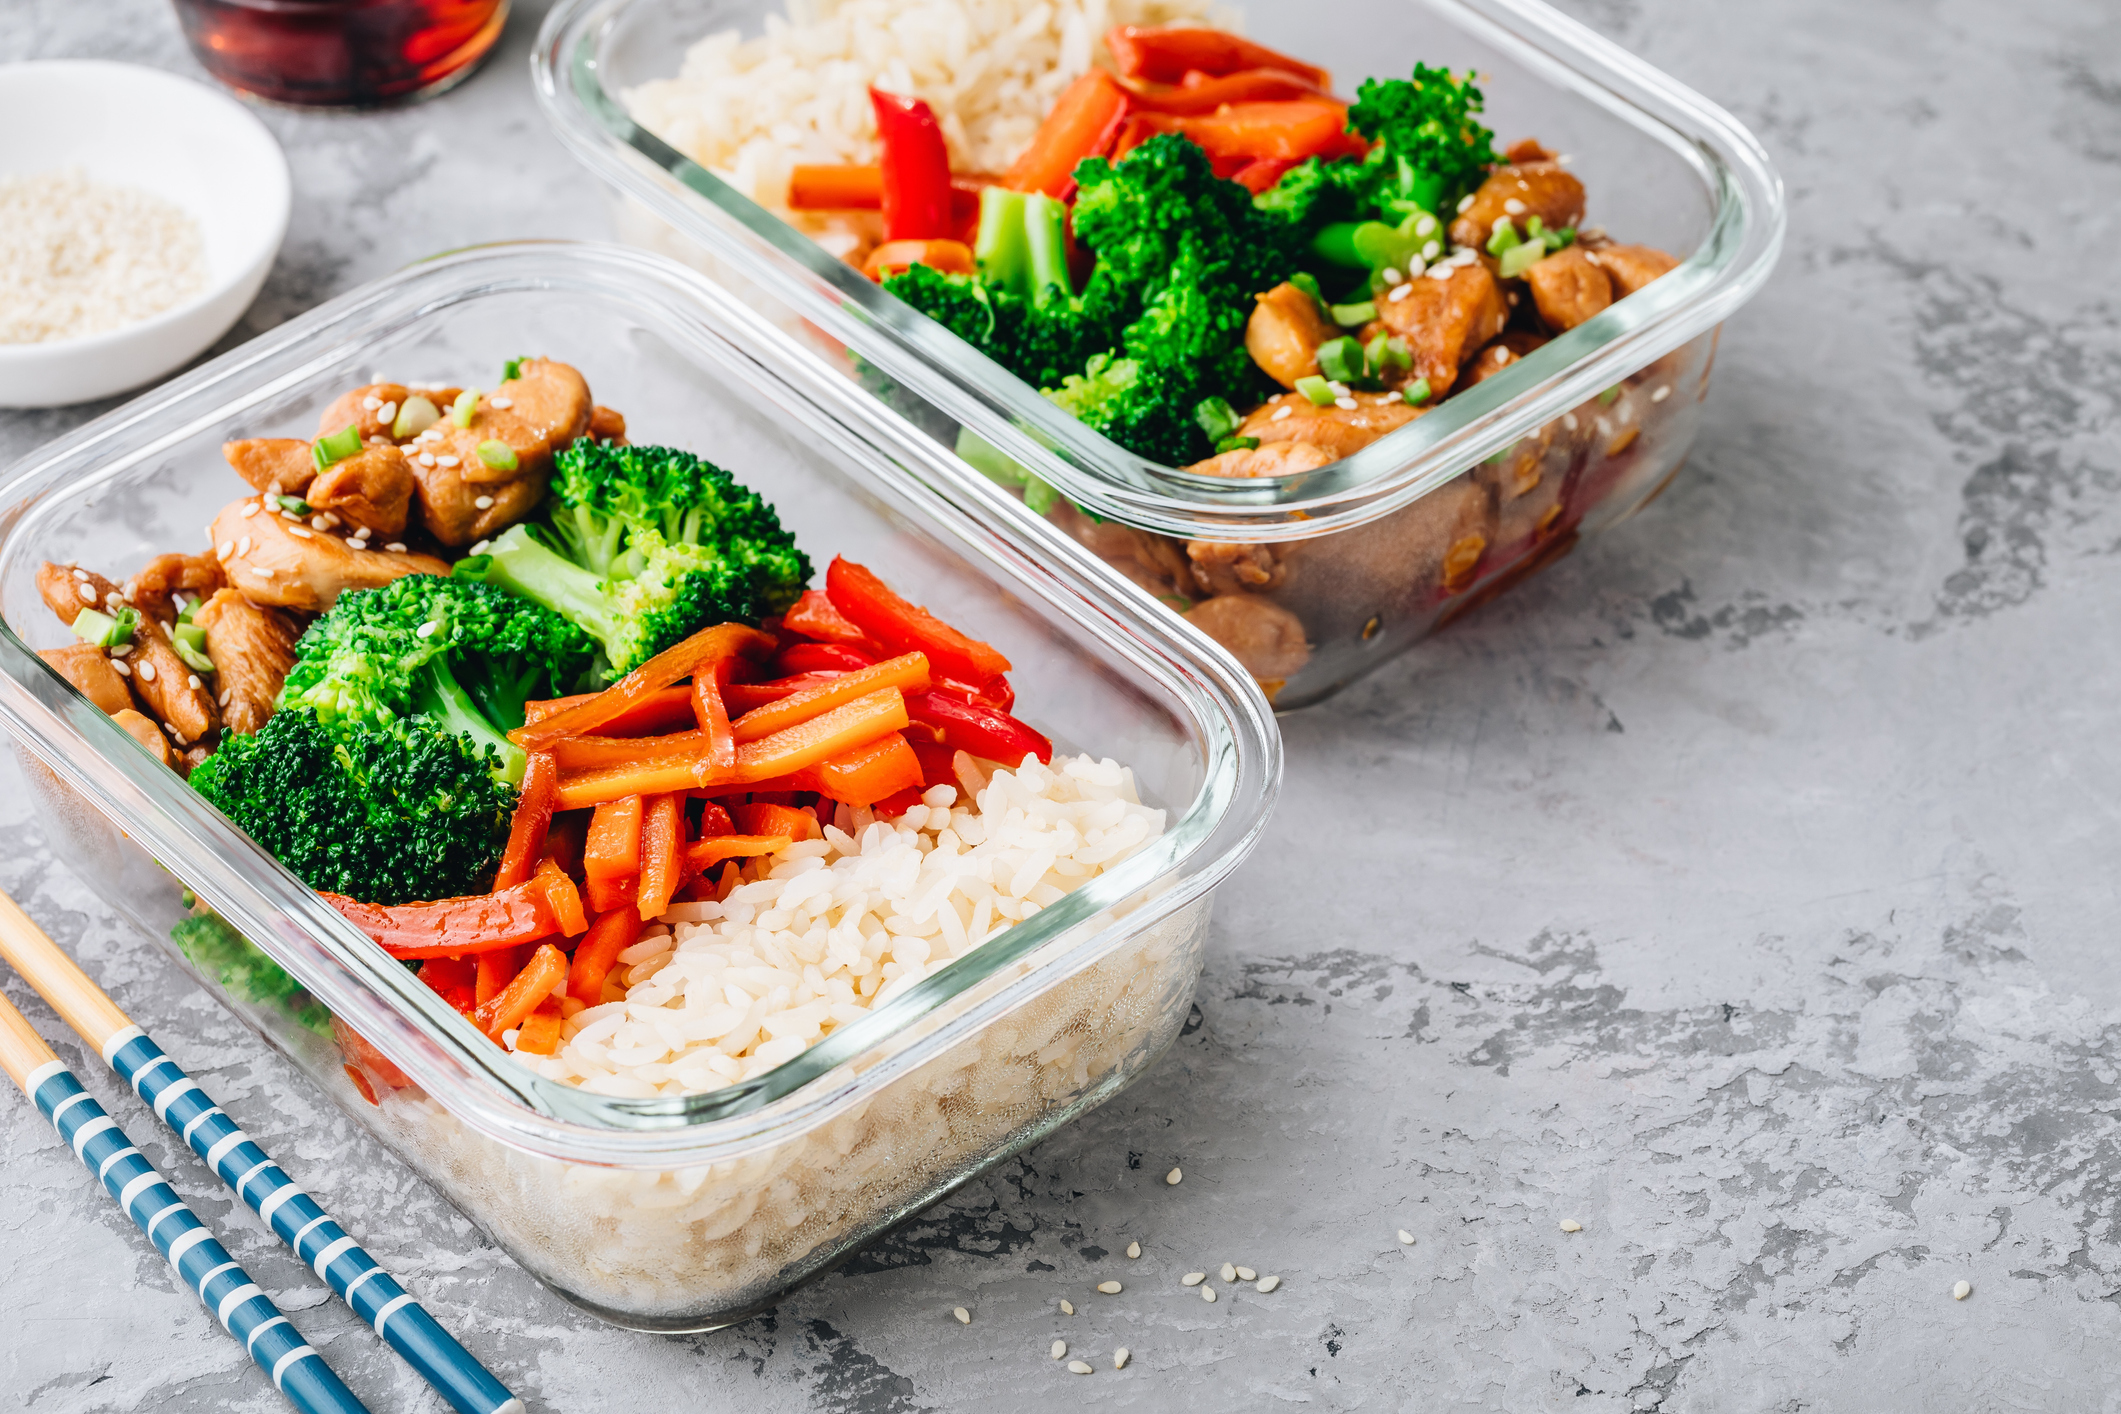 Must-Have Meal Prep Ingredients for Your FridgeRateMDs Health News